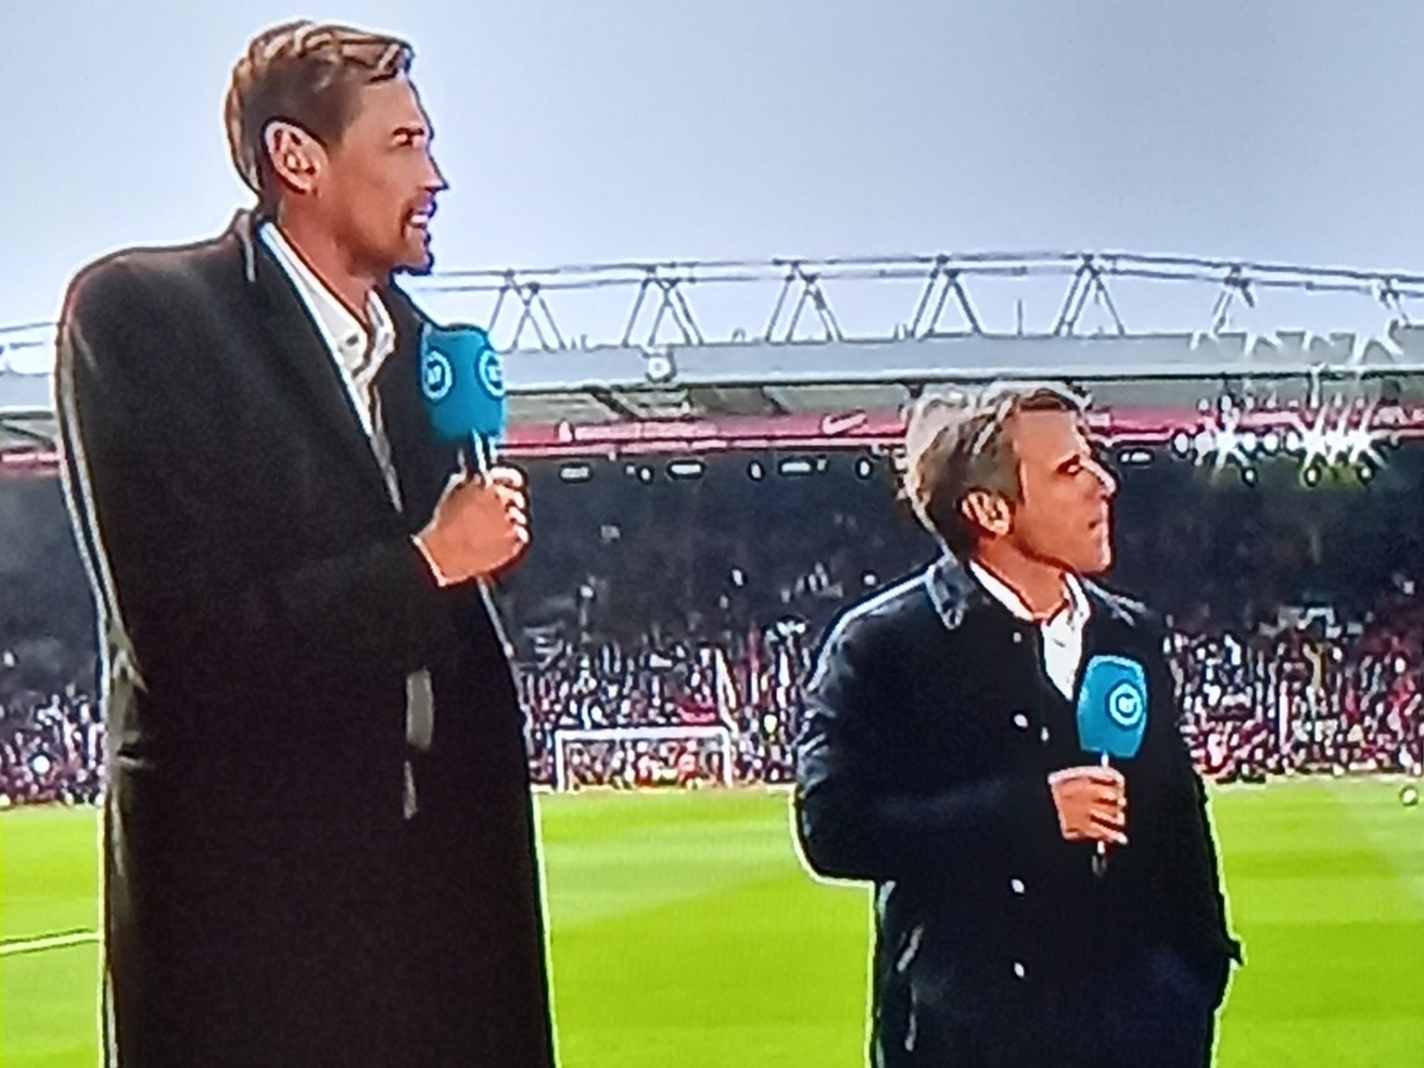 Gianfranco Zola (right) stands next to Peter Crouch